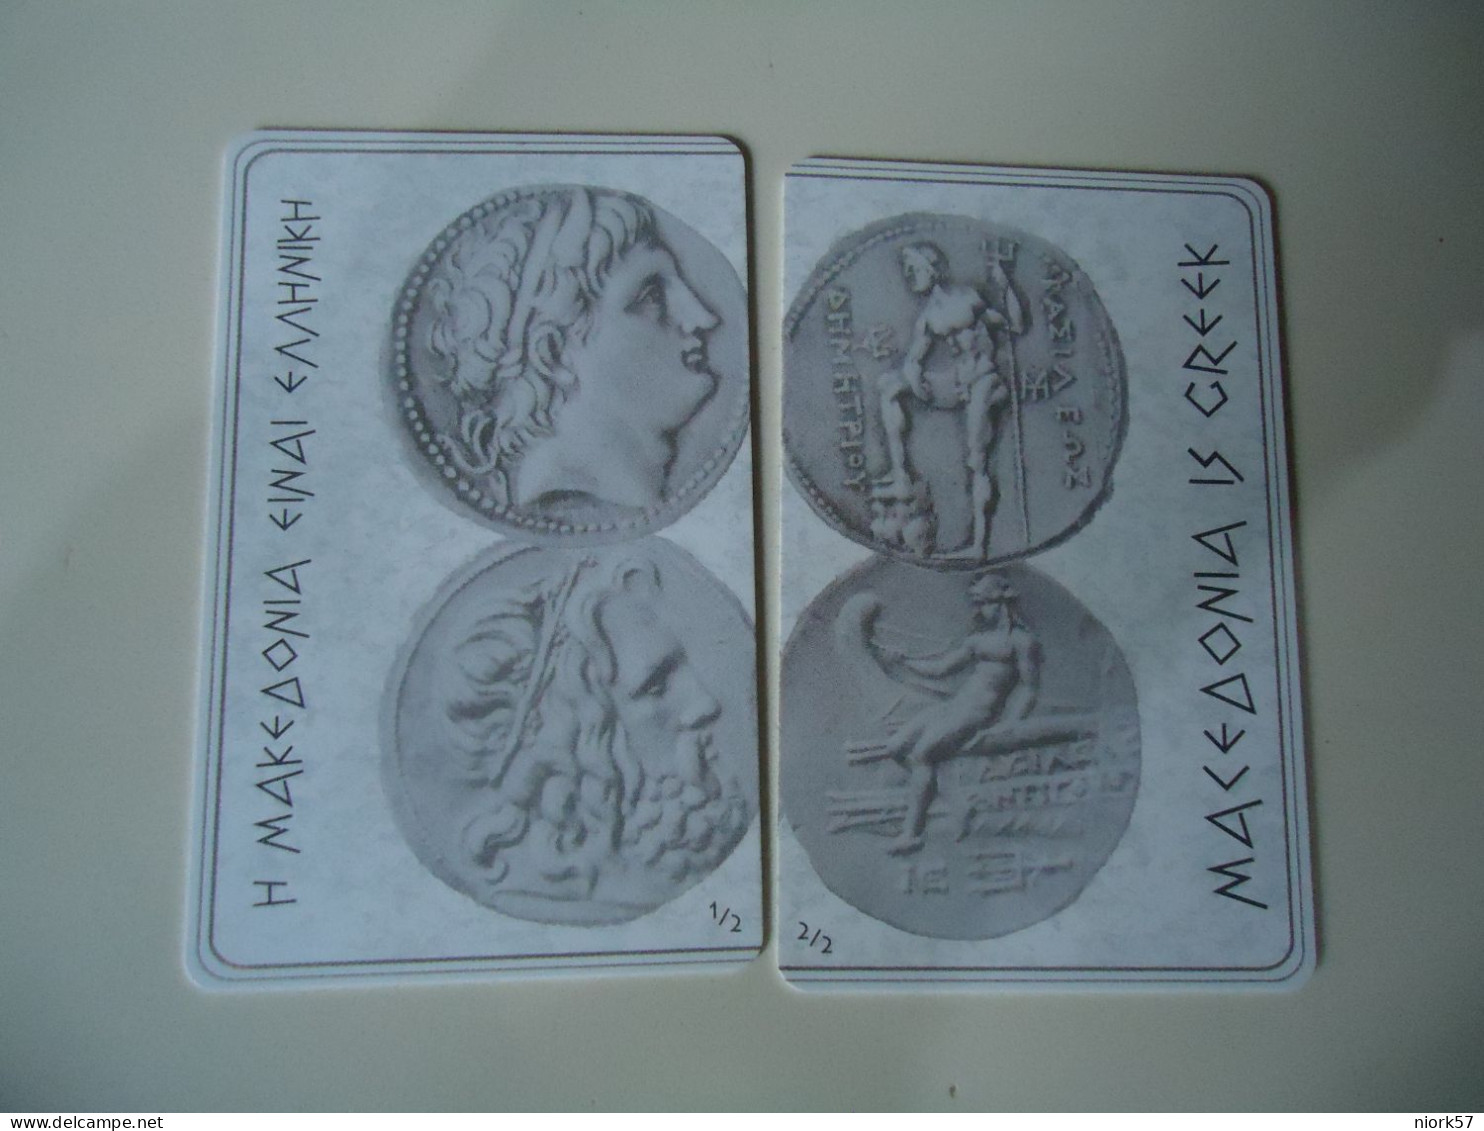 GREECE MINT  PUZZLE 2 CARDS COLLECTIVE COINS FROM  MACEDONIA - Timbres & Monnaies